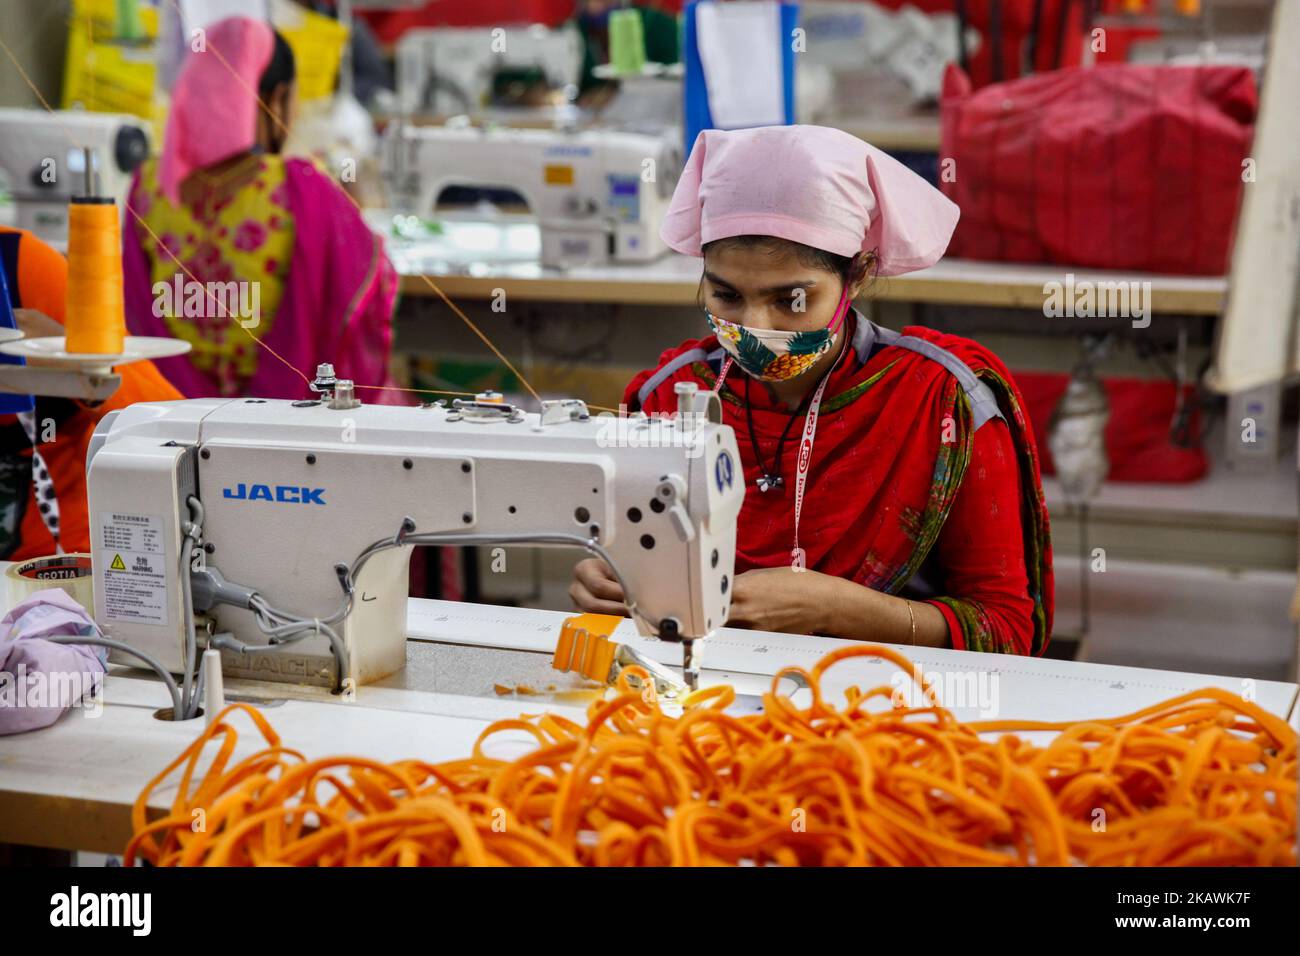 Bangladeshi female workers work at a garments factory in Gazipur outskirts of Dhaka on February 17, 2018. The garment sector has provided employment opportunities to women from the rural areas that previously did not have any opportunity to be part of the formal workforce. This has given women the chance to be financially independent and have a voice in the family because now they contribute financially.However, women workers face problems. Most women come from low income families. Low wage of women workers and their compliance have enabled the industry to compete with the world market.The tex Stock Photo